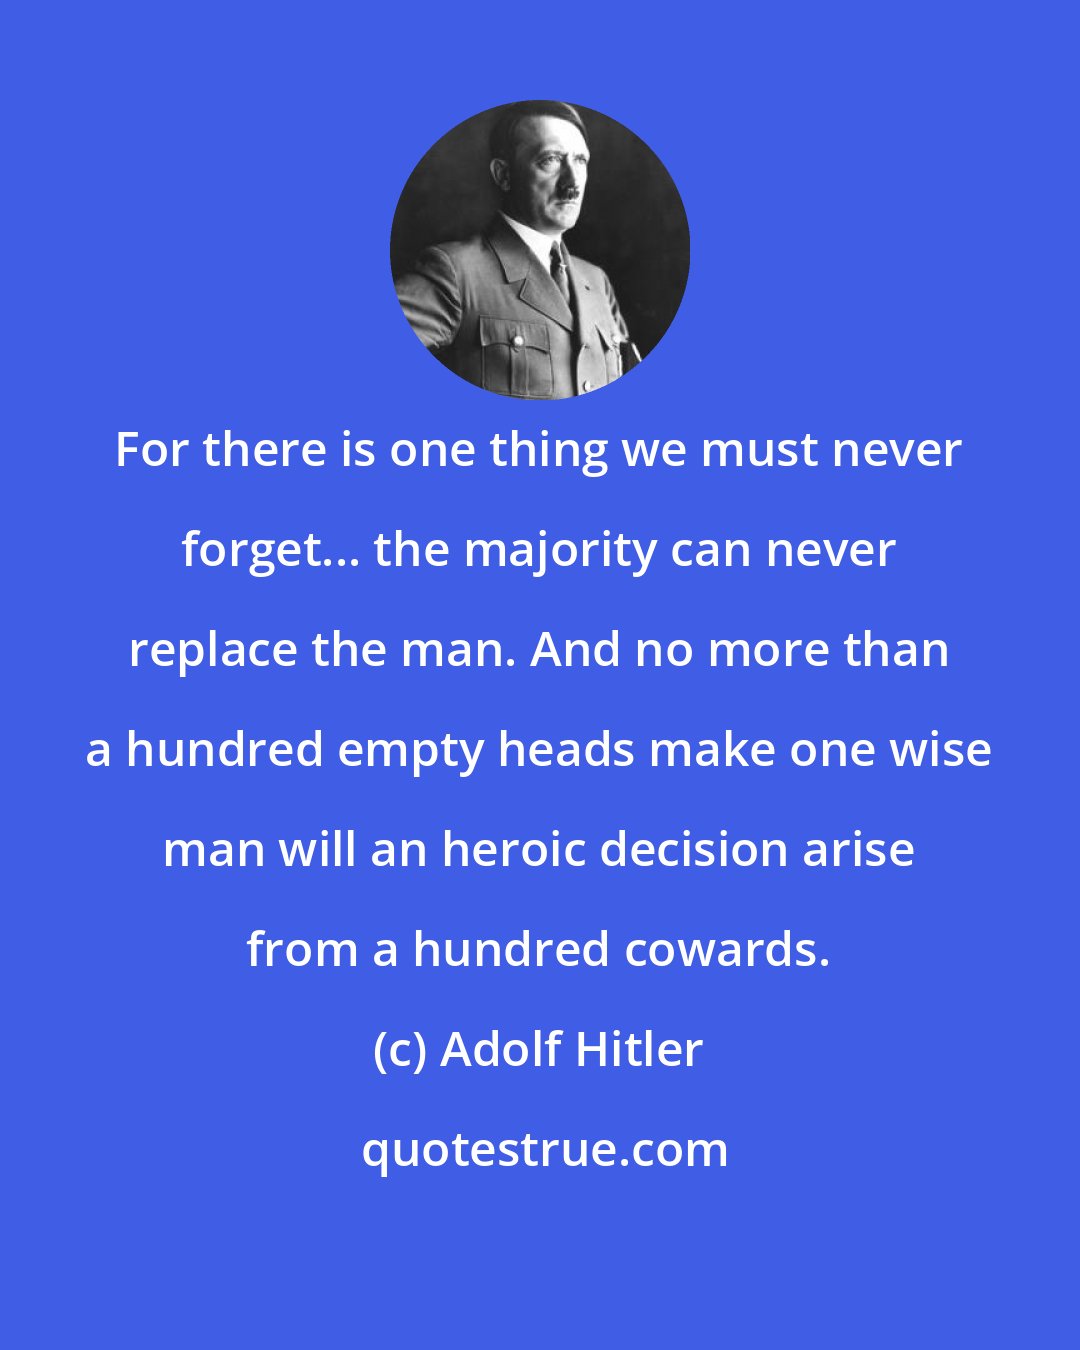 Adolf Hitler: For there is one thing we must never forget... the majority can never replace the man. And no more than a hundred empty heads make one wise man will an heroic decision arise from a hundred cowards.